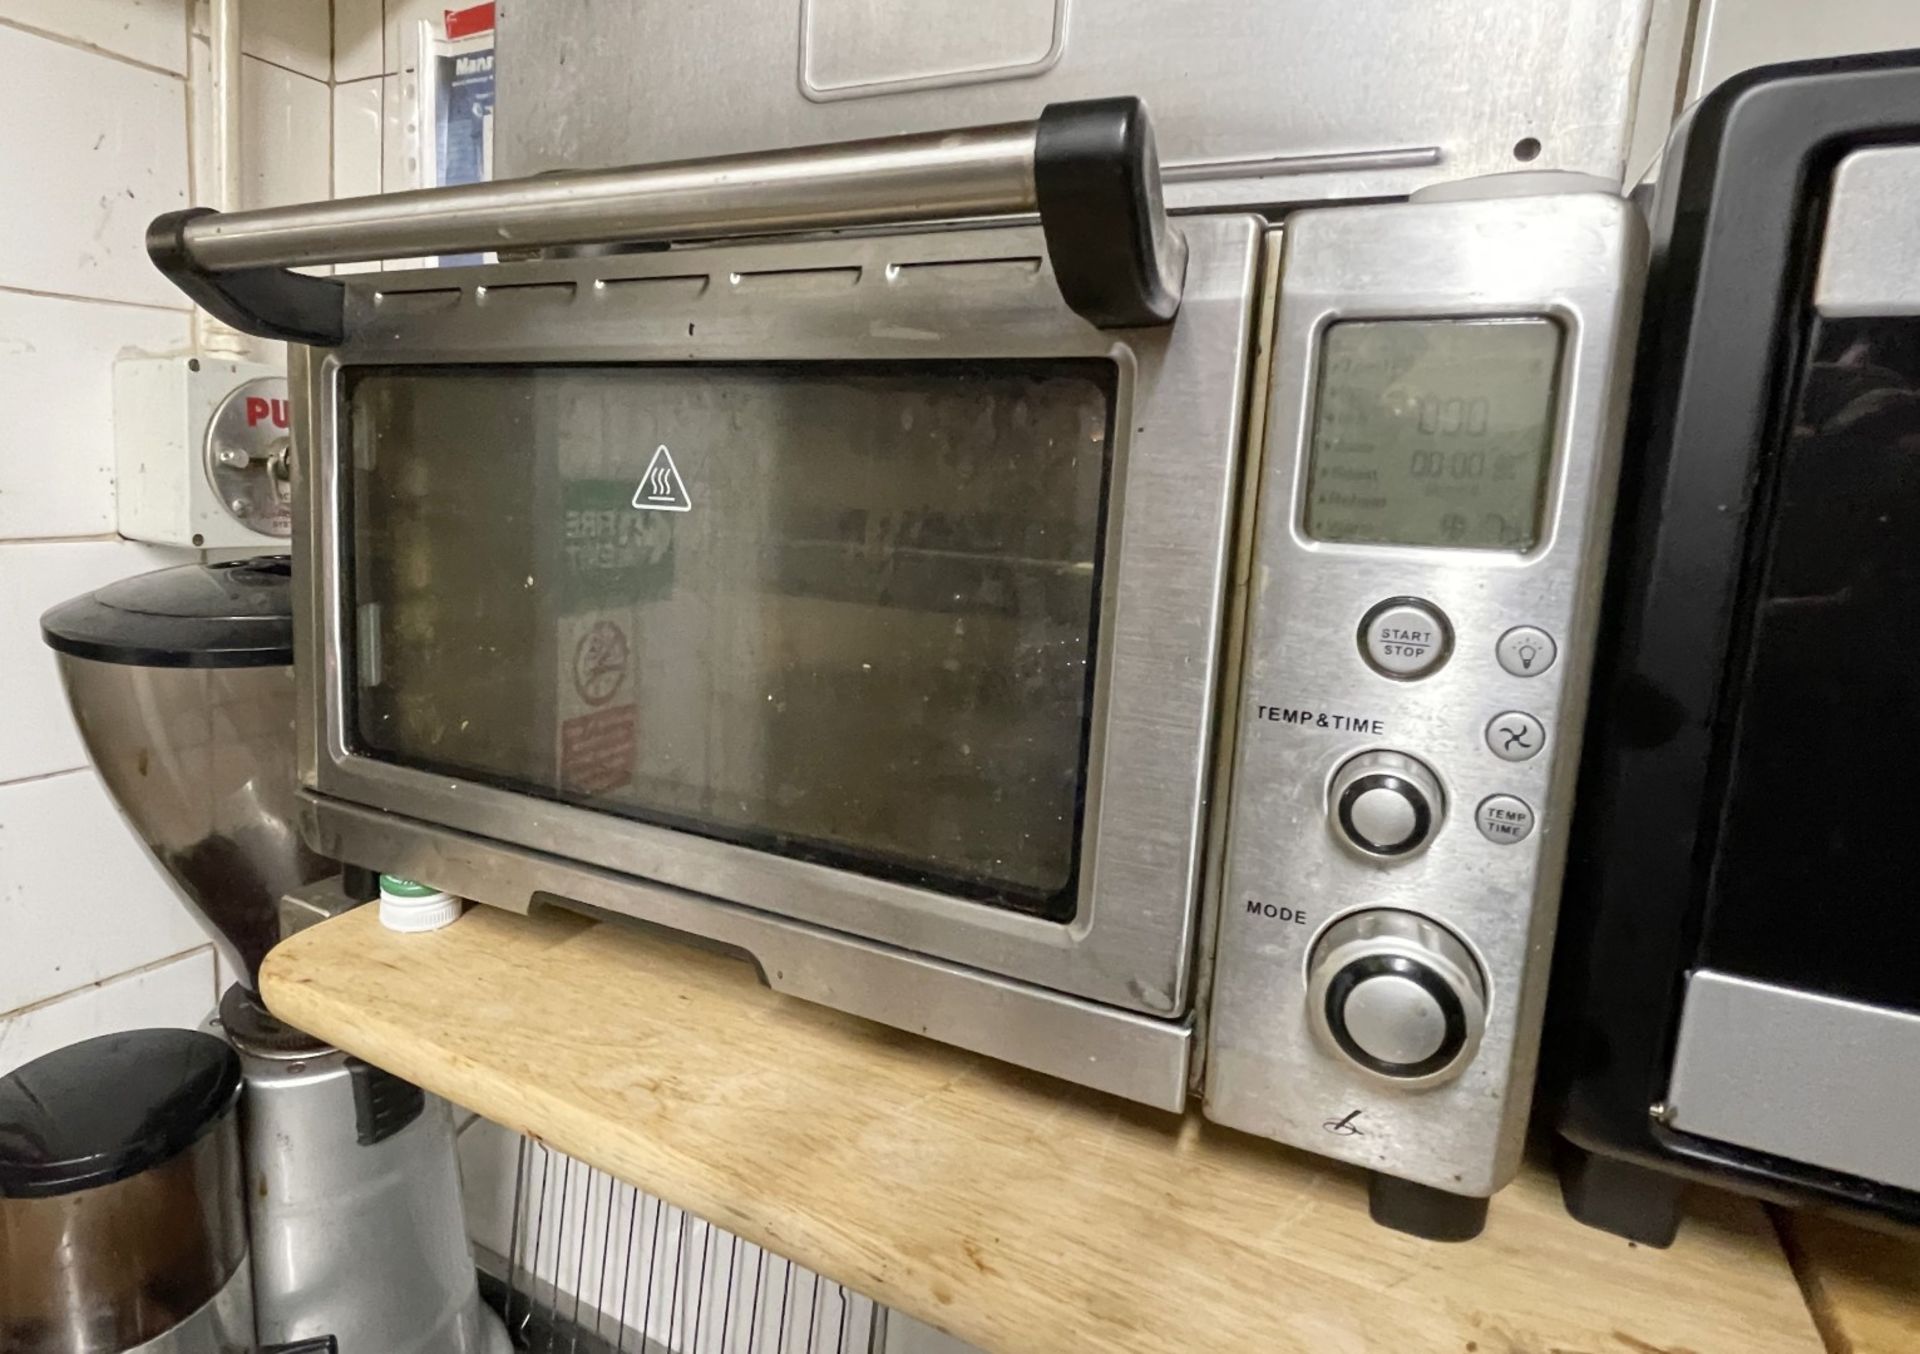 1 x Electric Countertop Convection Oven With Pull-down Door and Stainless Steel Finish - Image 2 of 2